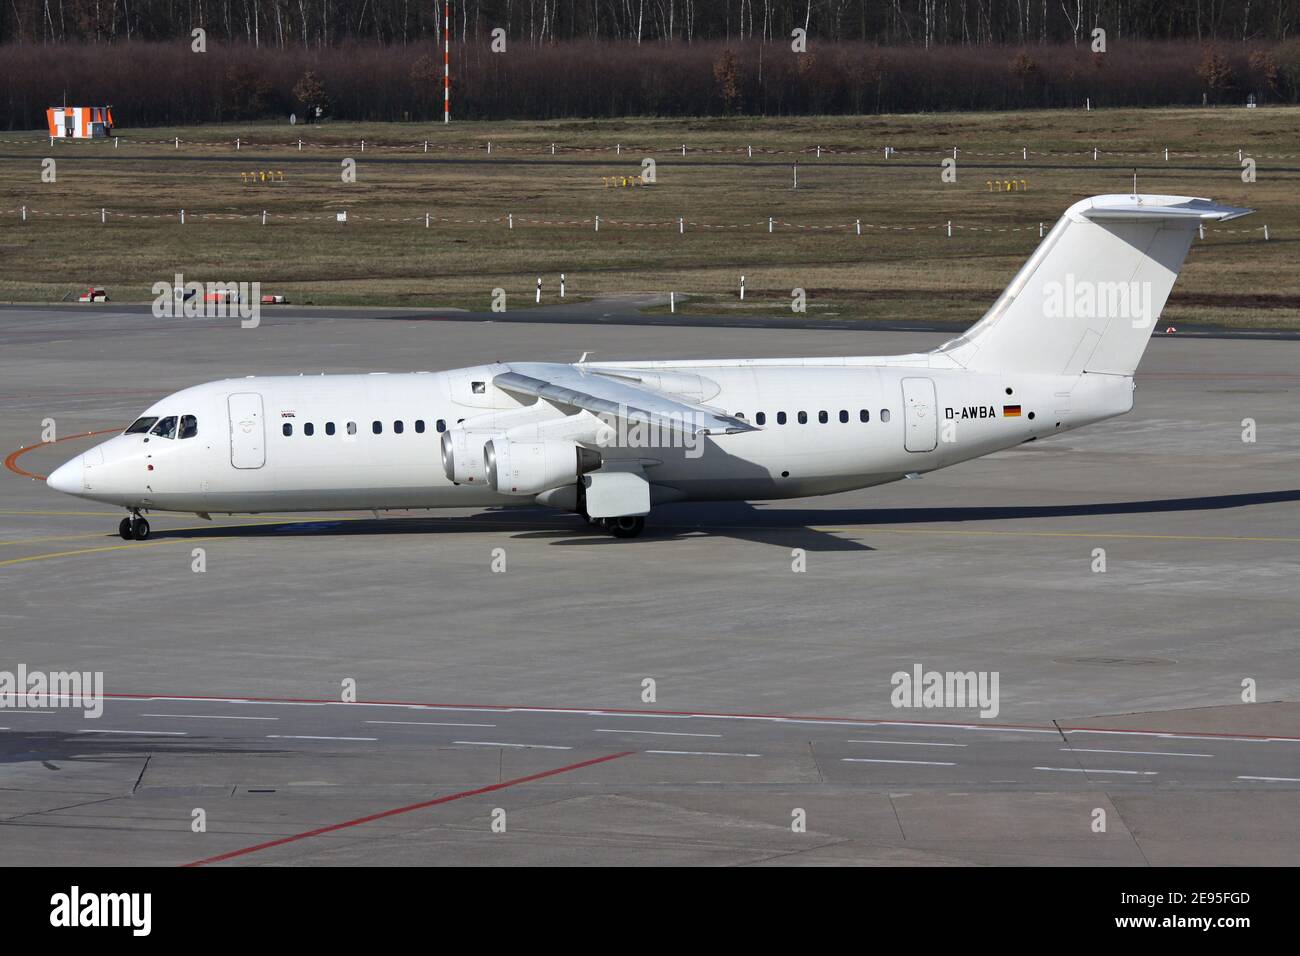 German WDL Aviation BAe 146-300 with registration D-AWBA at Cologne Bonn Airport. Stock Photo